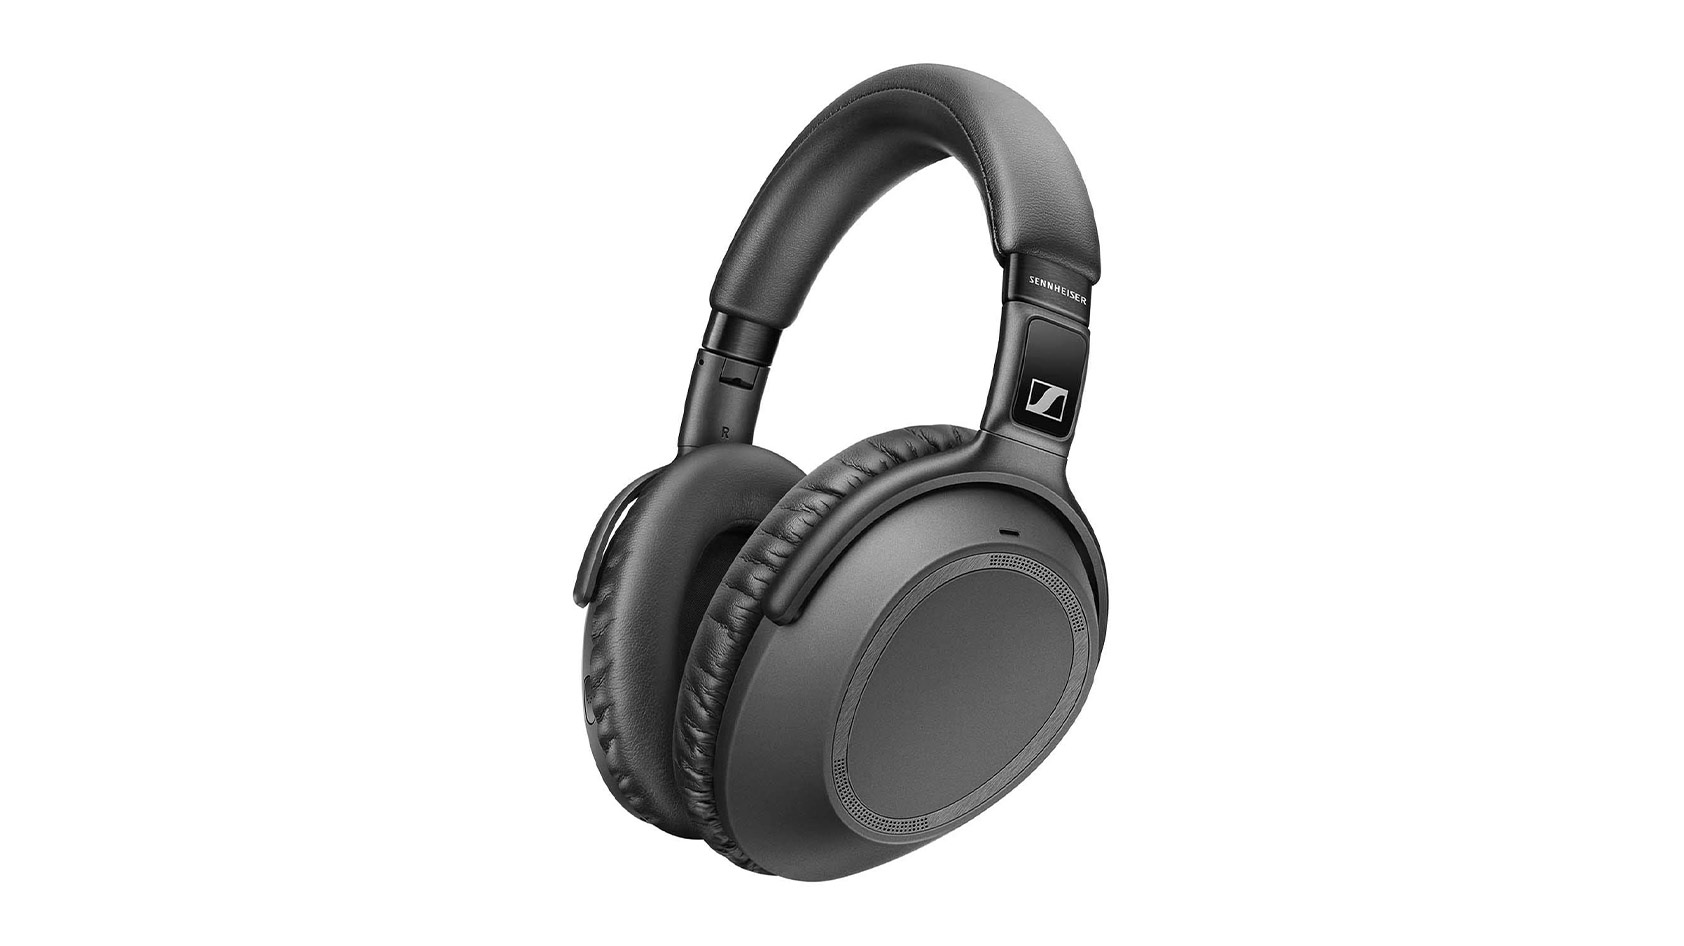 Product render of the Sennheiser PXC 550-II noise canceling over-ear headphones against a white background.